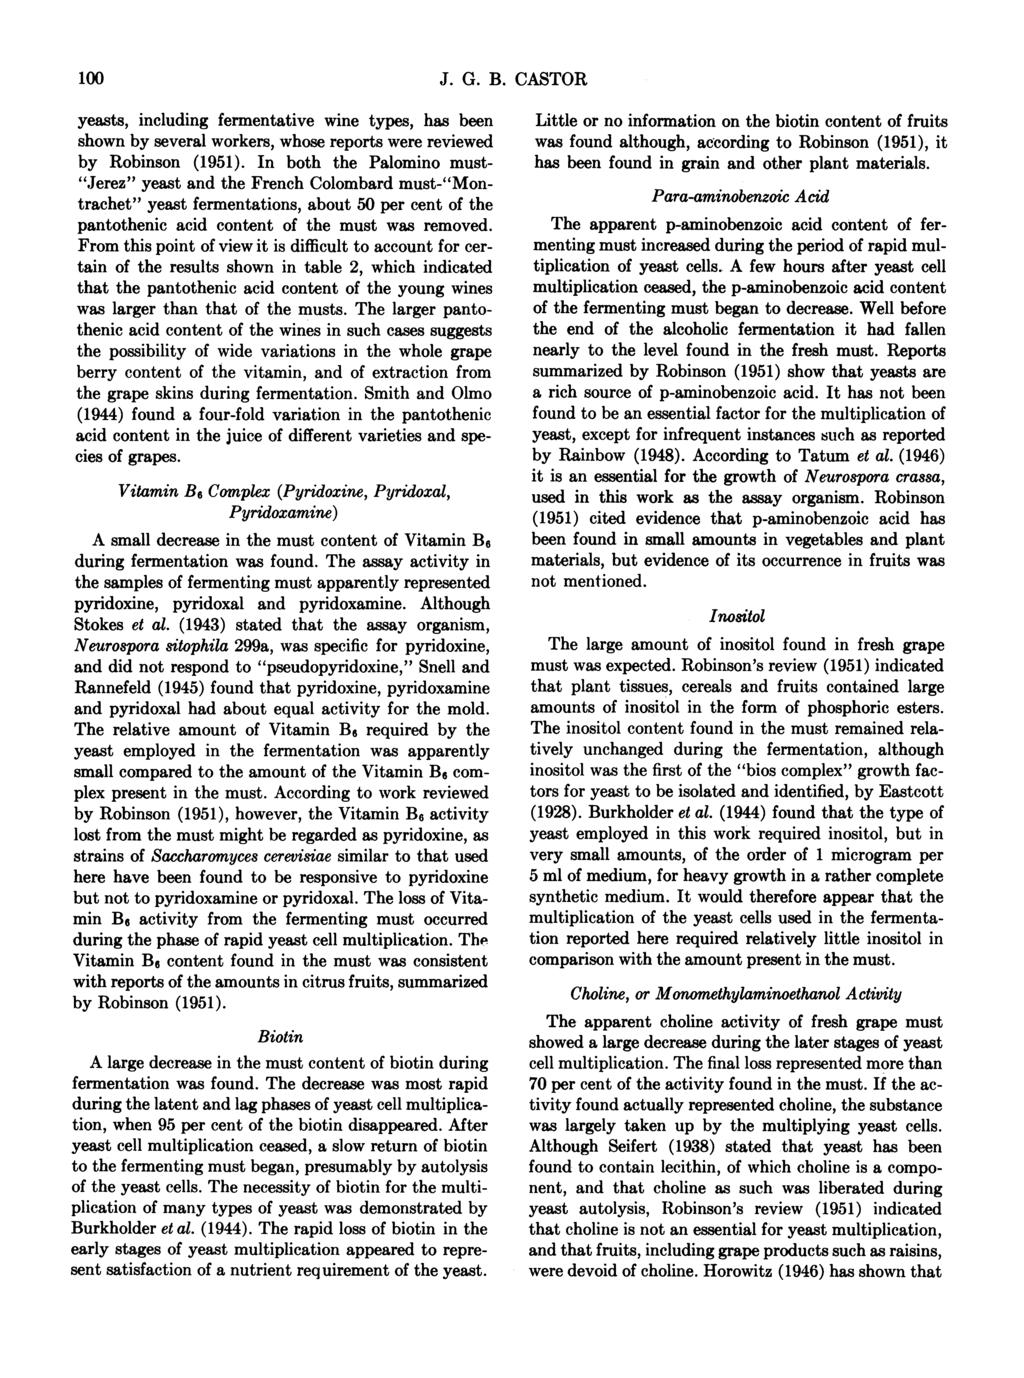 100 yeasts, including fermentative wine types, has been shown by several workers, whose reports were reviewed by Robinson (1951).